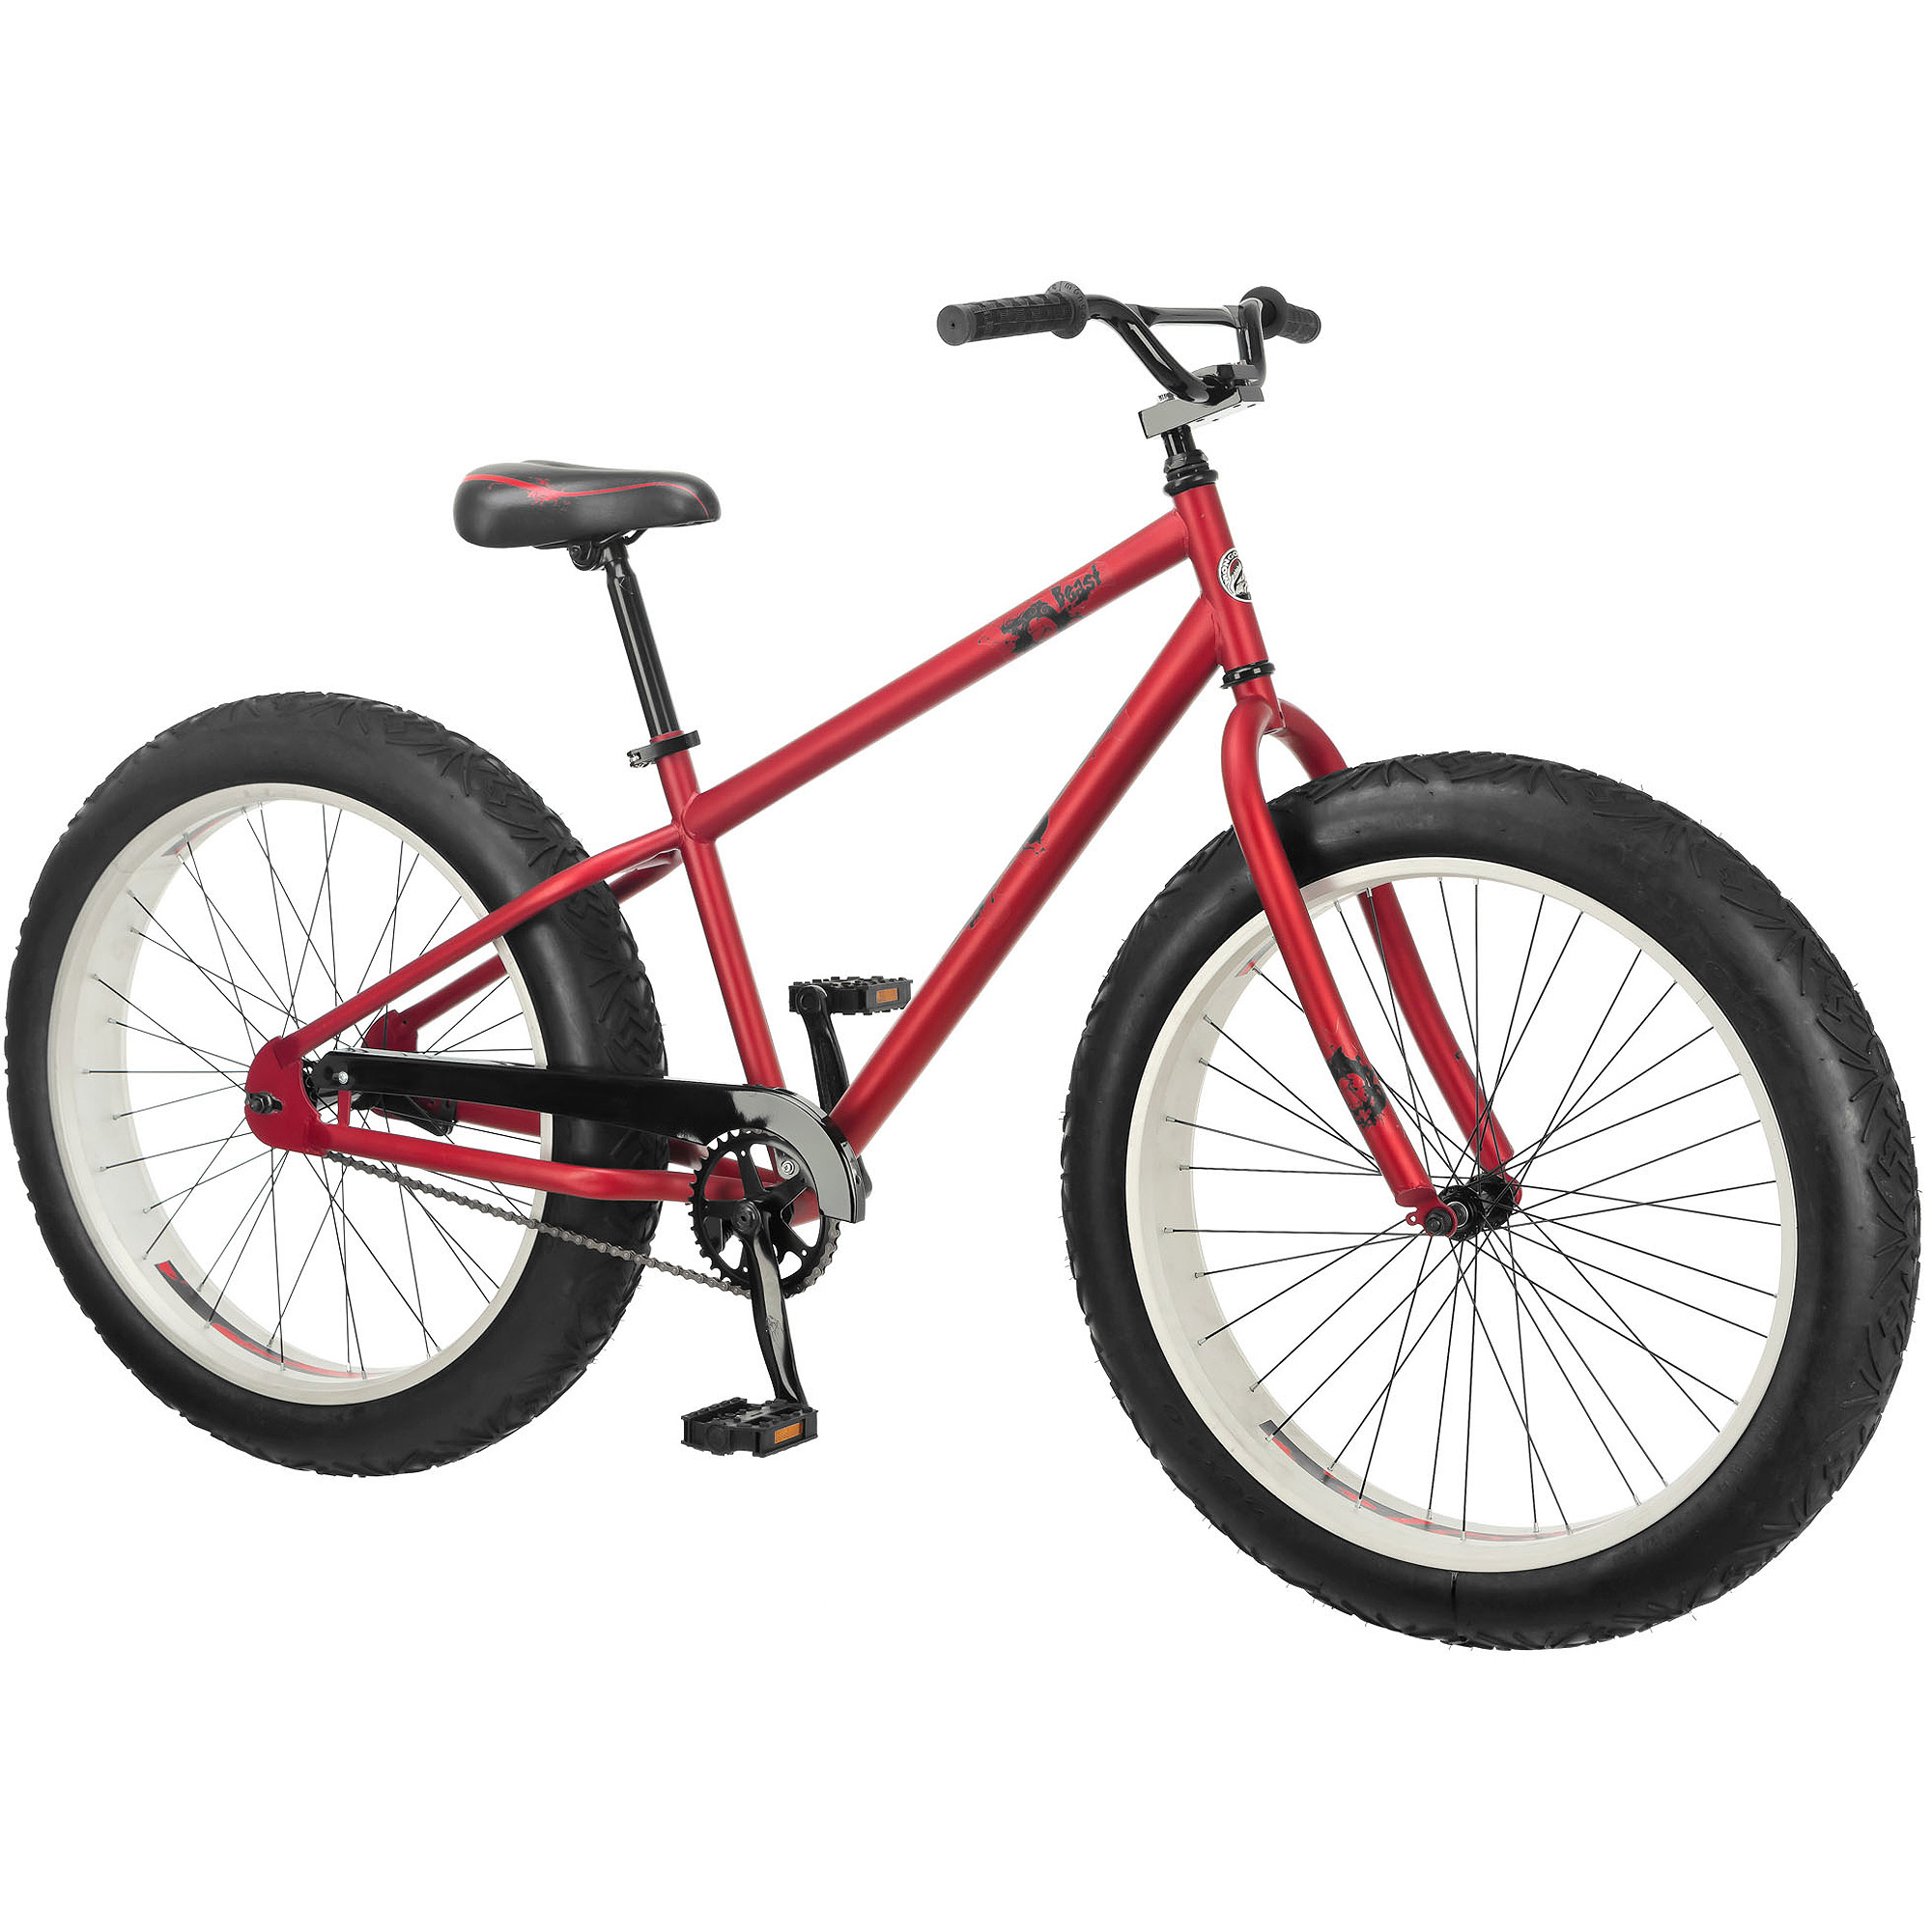 26" Mongoose Beast Men's All-Terrain Fat Tire Mountain, Red - image 1 of 5